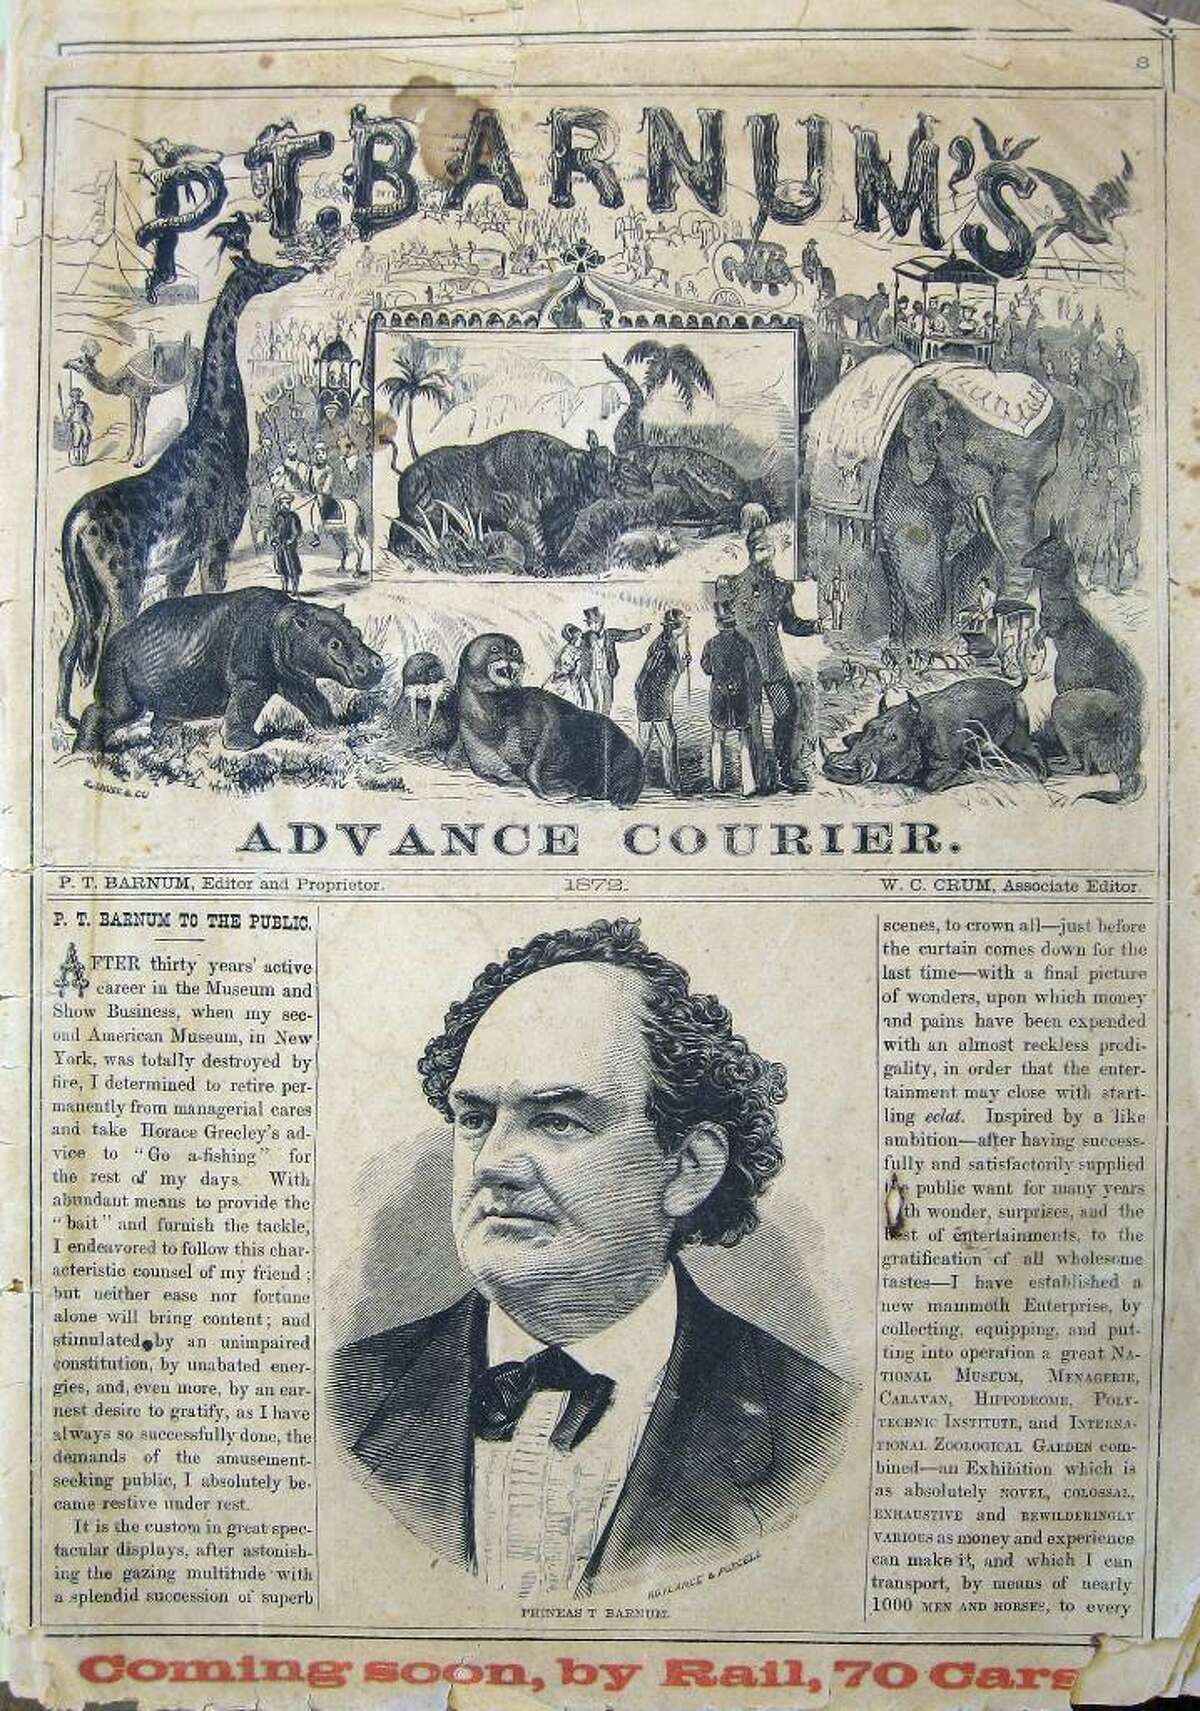 P.T. Barnum: Master of advertising and promotion